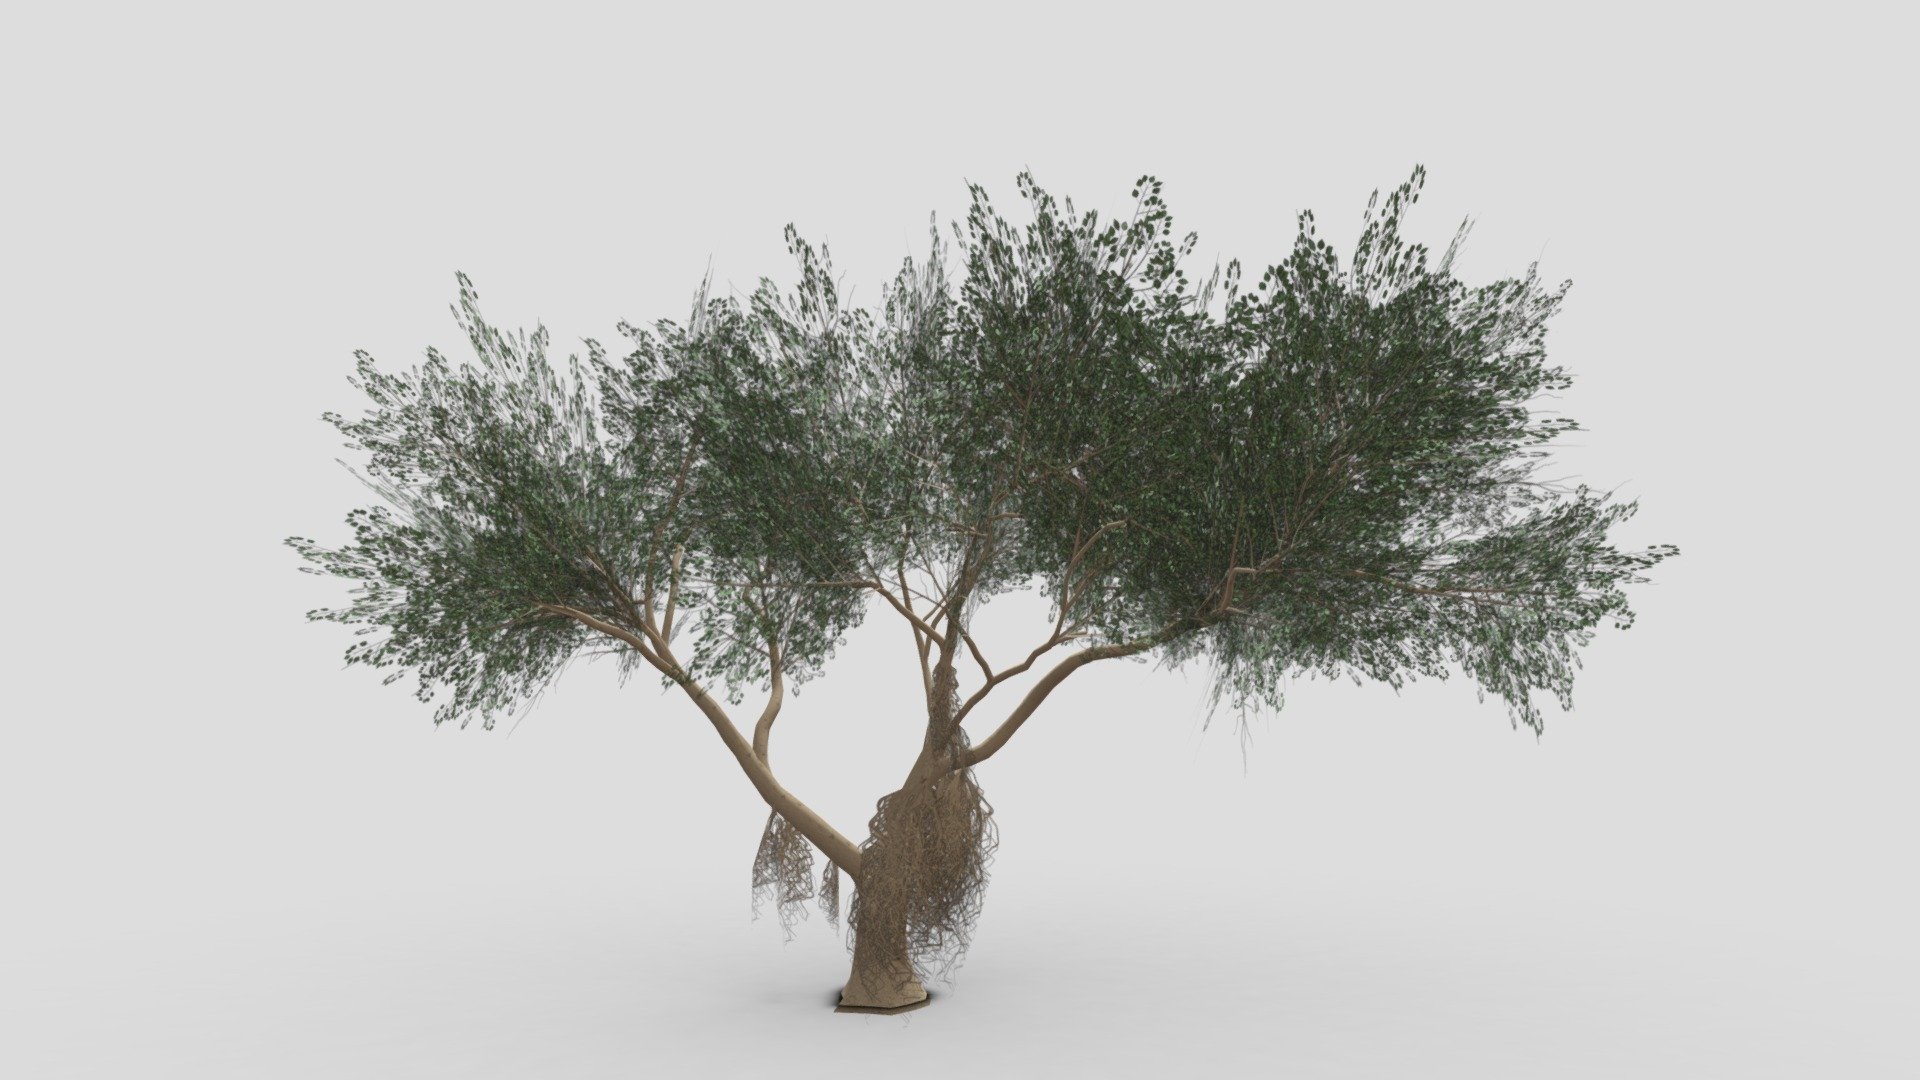 I try to work on Ficus Benjamina Tree to use this in your project. this is a low poly 3D model. Tree info: Ficus Benjamina, commonly known as weeping fig, benjamin fig, or ficus tree, and often sold in stores as just ficus, is a species of flowering plant in the family Moraceae, native to Asia and Australia. It is the official tree of Bangkok 3d model